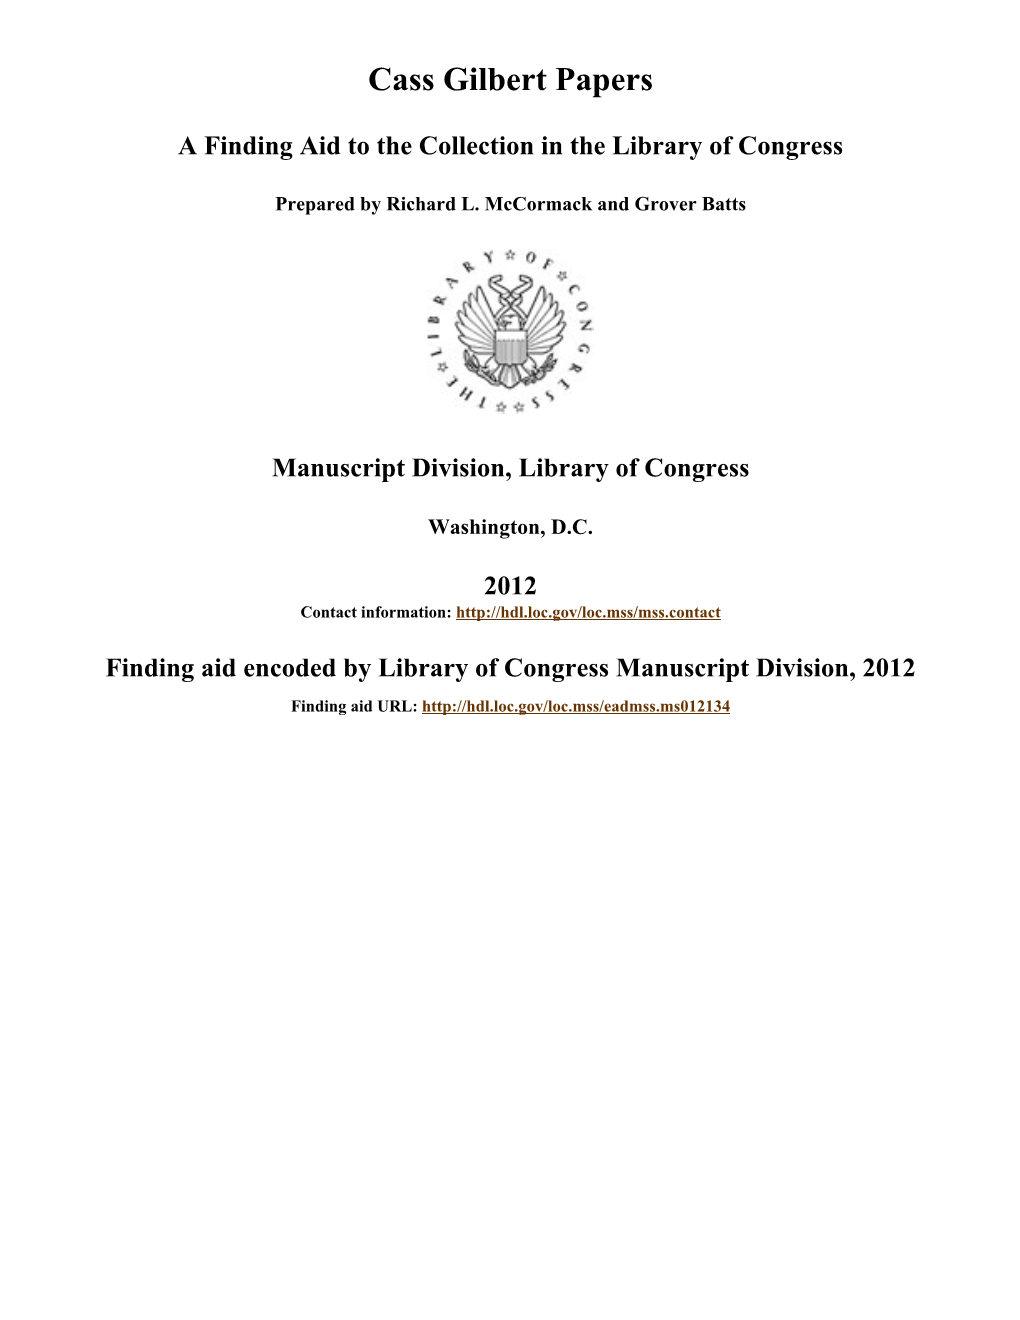 Cass Gilbert Papers [Finding Aid]. Library of Congress. [PDF Rendered